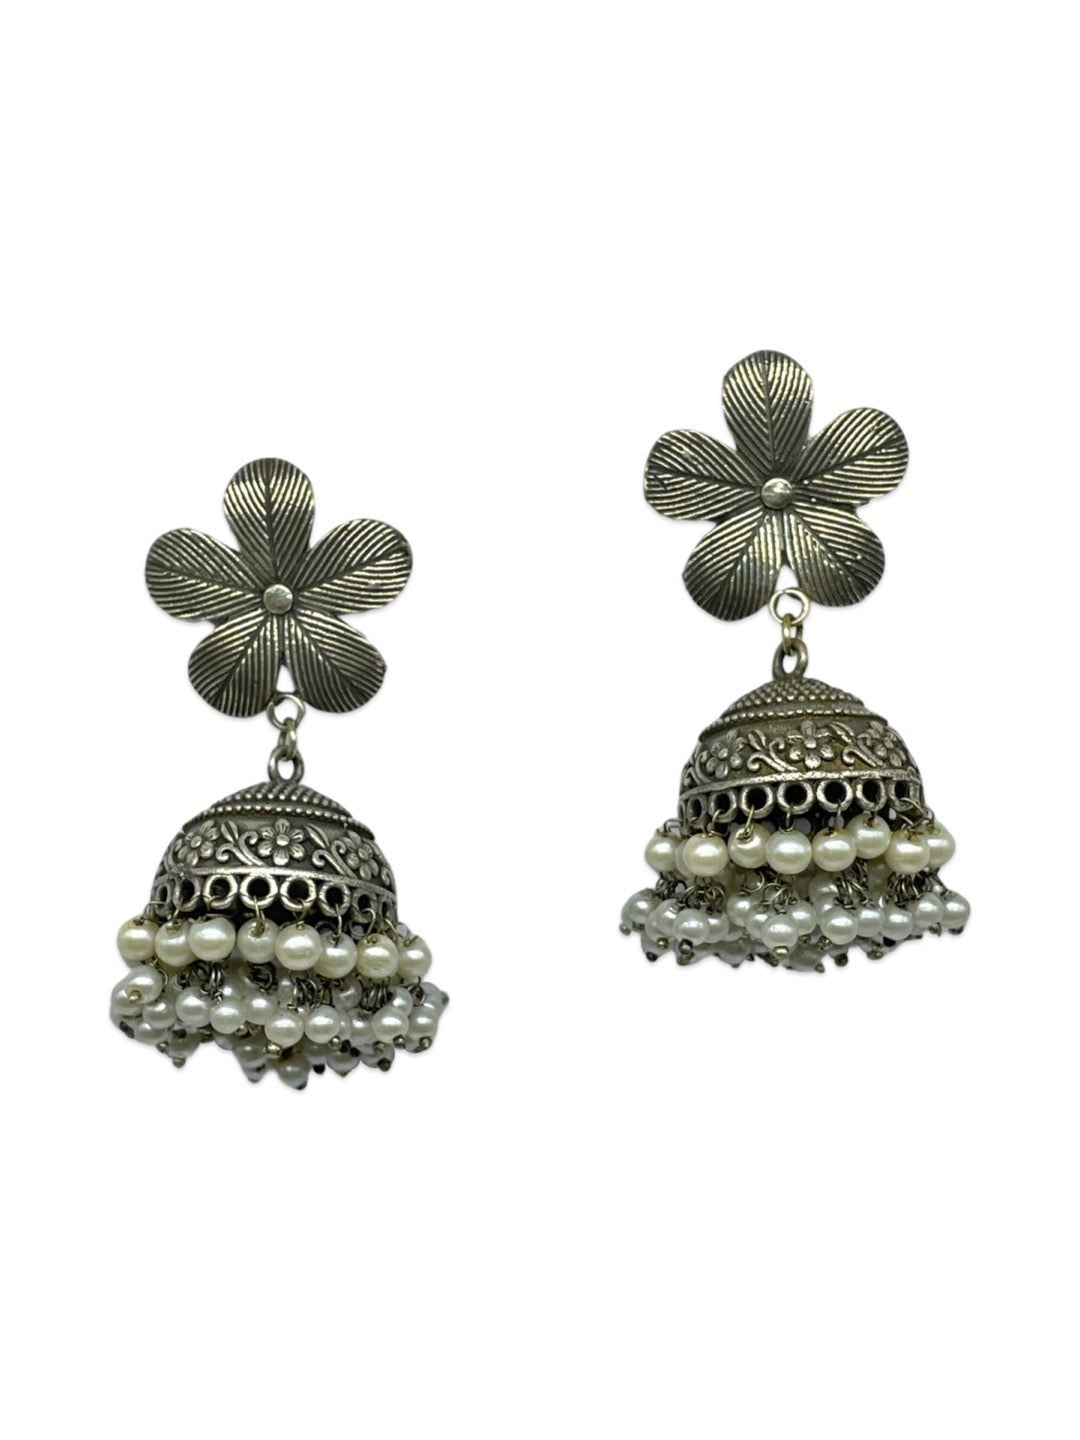 Jhumka Earring Floral Design With Pearls